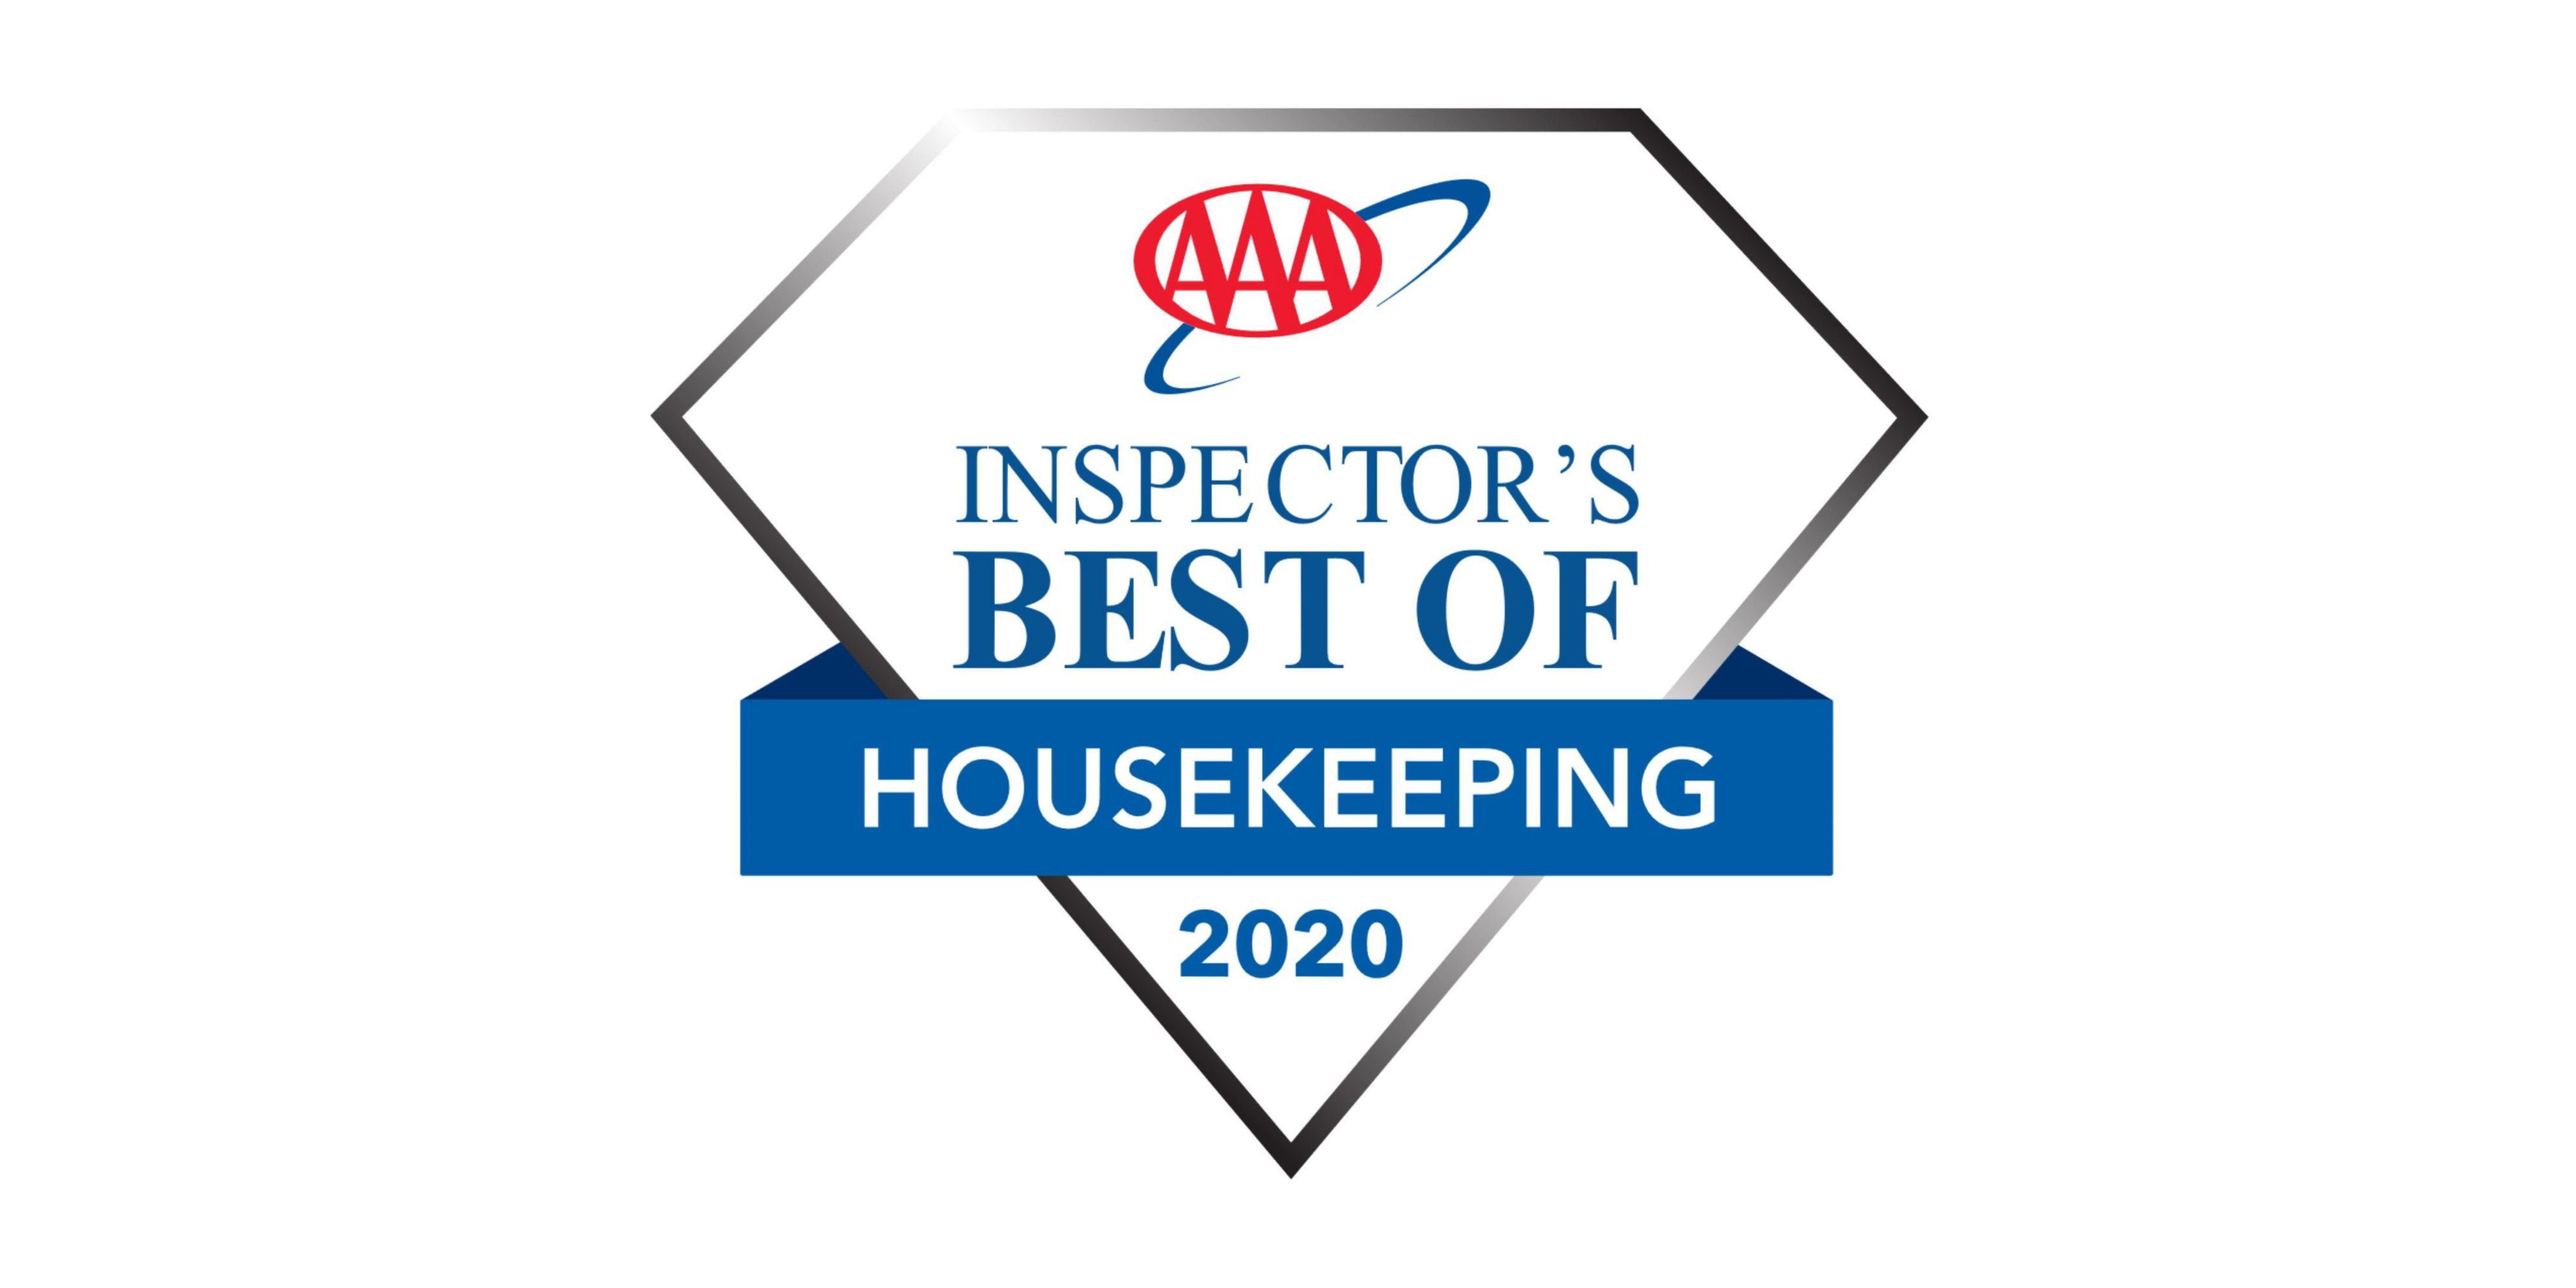 The hotel takes absolute pride in ensuring all spaces are kept clean and disinfected routinely using EcoLab cleaning products that are certified to protect against COVID-19. Housekeeping has significantly surpassed expectations as measured during comprehensive on-site inspections, and thus has been awarded the AAA 2020 Best of Housekeeping badge!